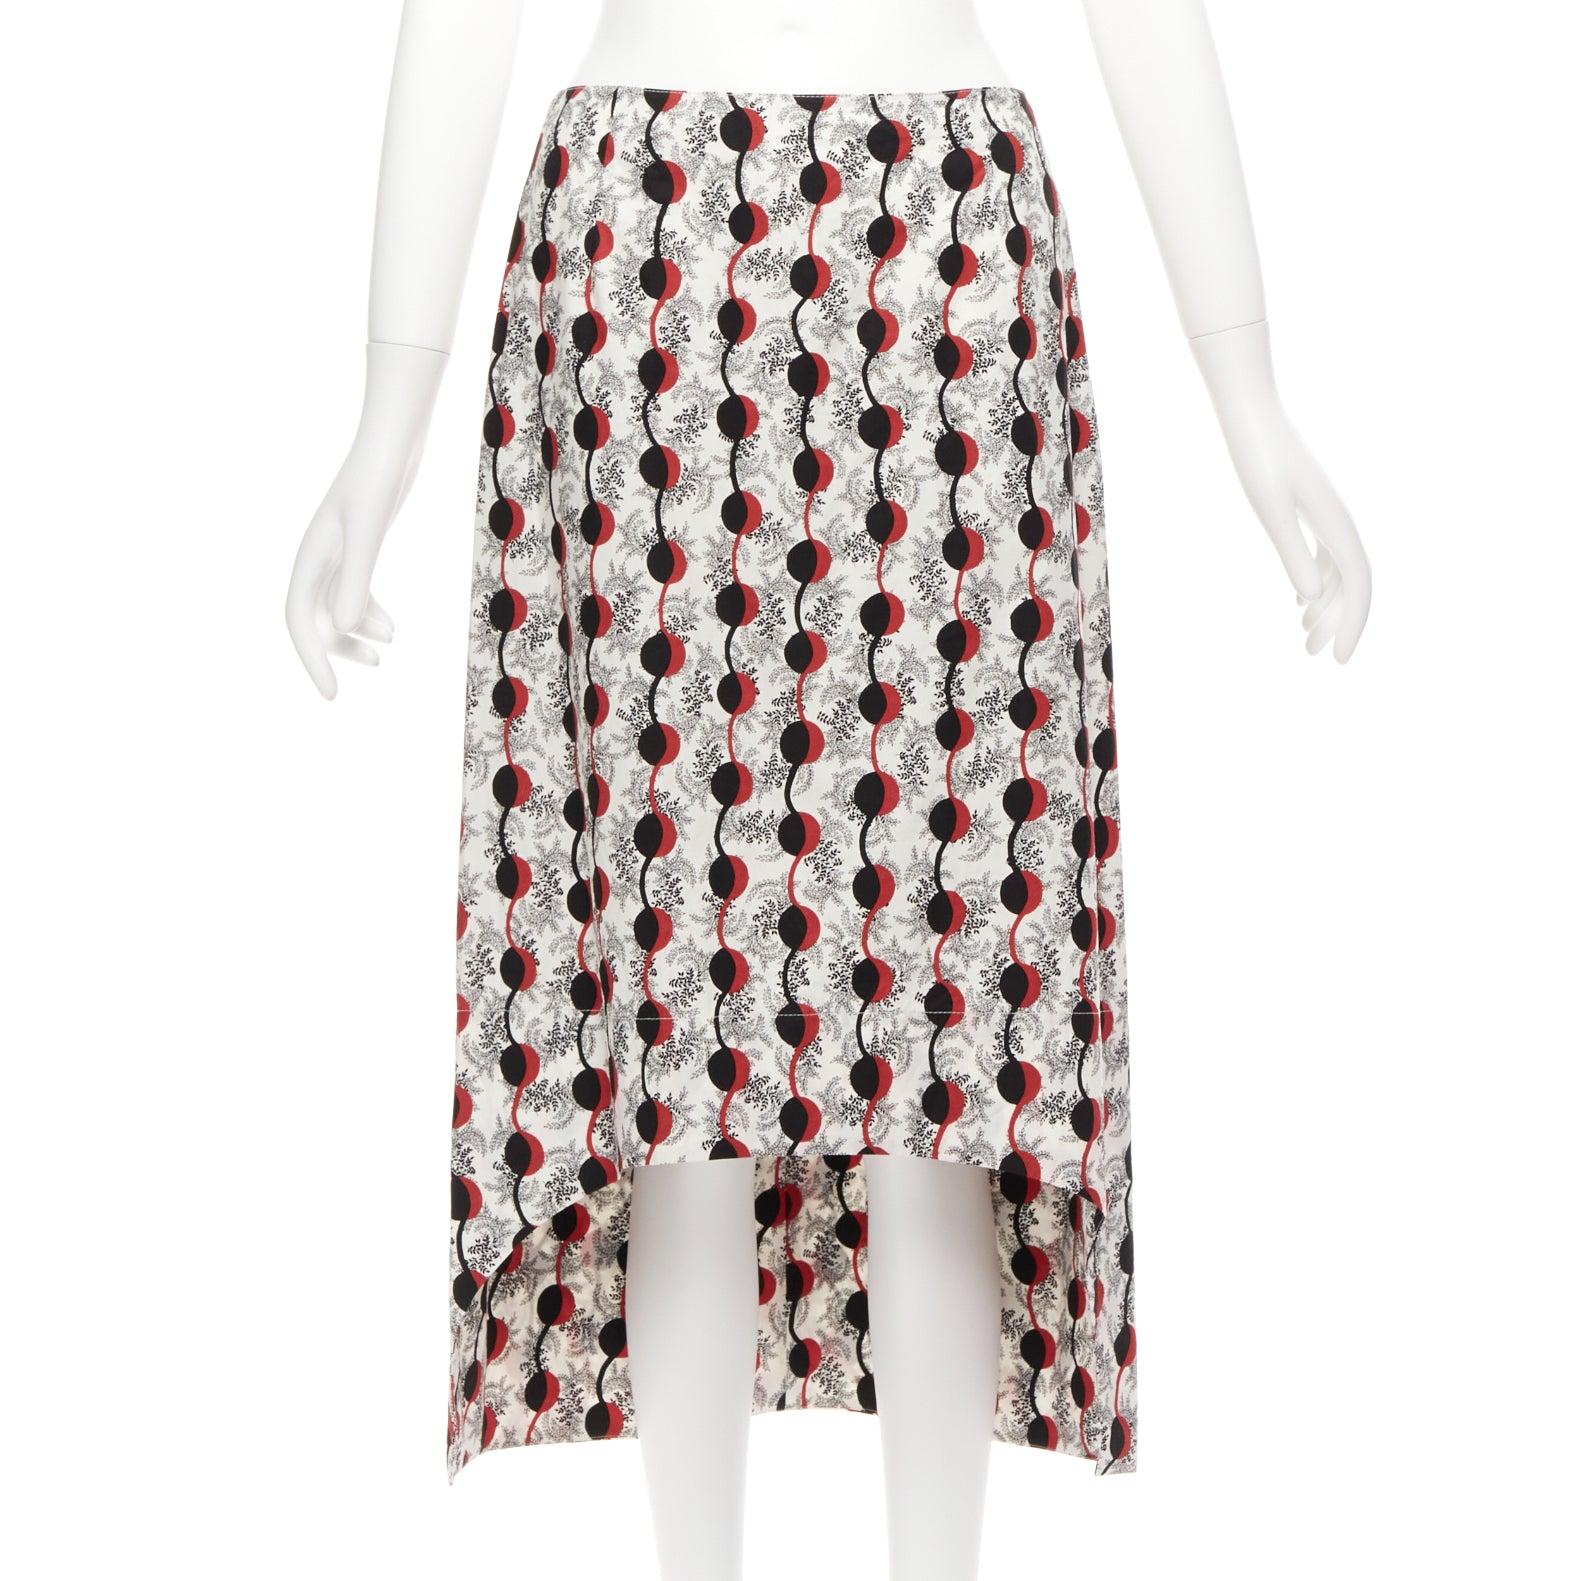 MARNI red black floral geometric graphic print hi low hem skirt IT40 S
Reference: CELG/A00267
Brand: Marni
Material: Cotton
Color: Red, Black
Pattern: Floral
Closure: Zip
Extra Details: Back zip.
Made in: Italy

CONDITION:
Condition: Excellent, this